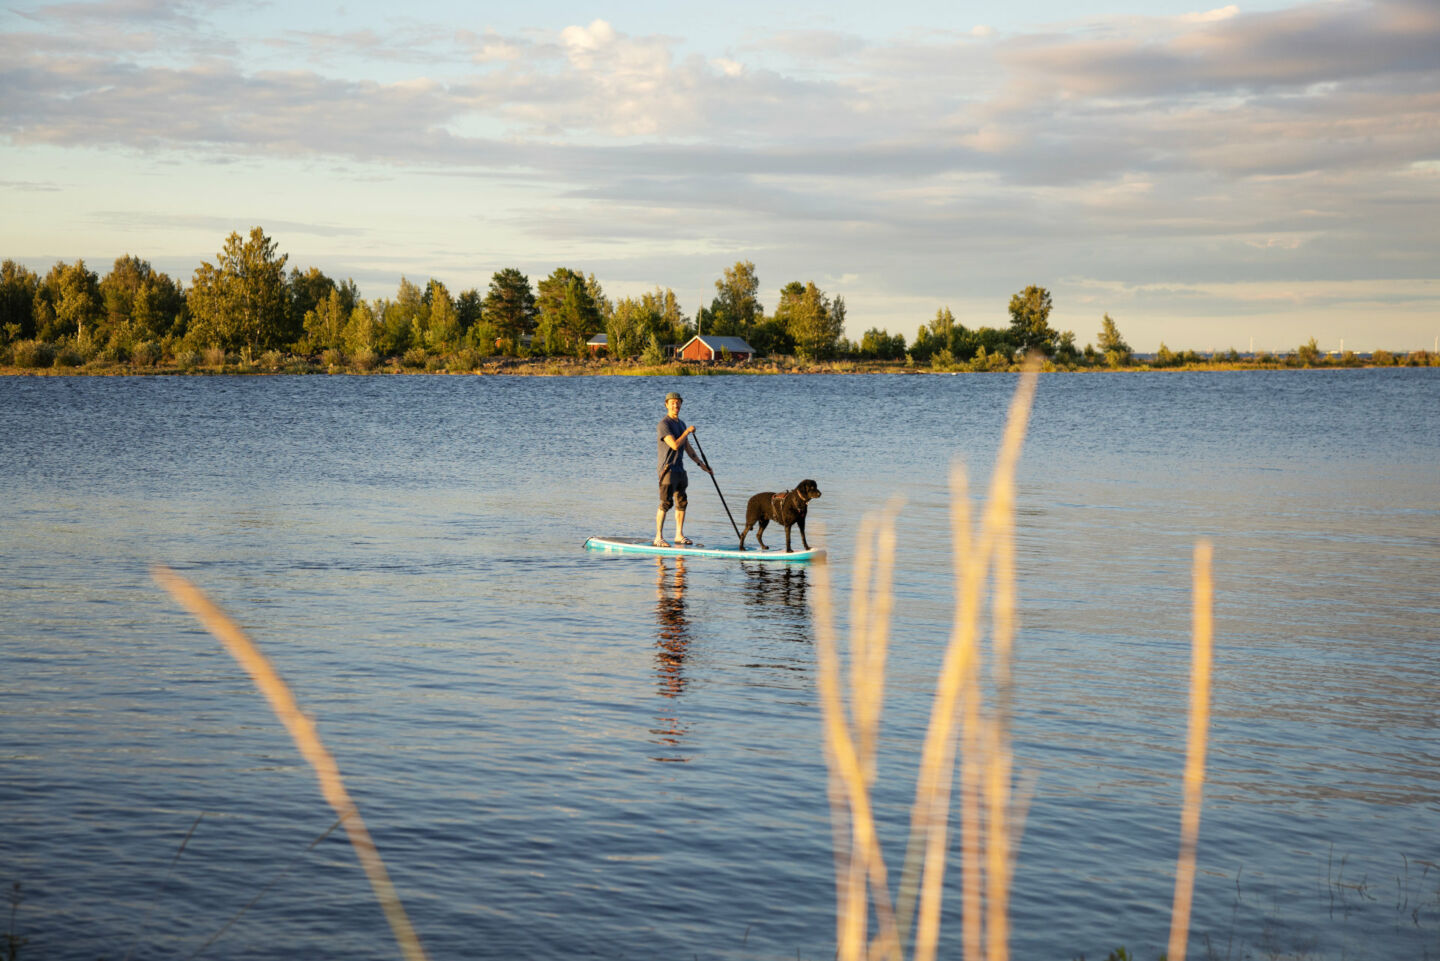 SUP boarding with a dog in the archipelago national park in Kemi, a Finnish Lapland filming location